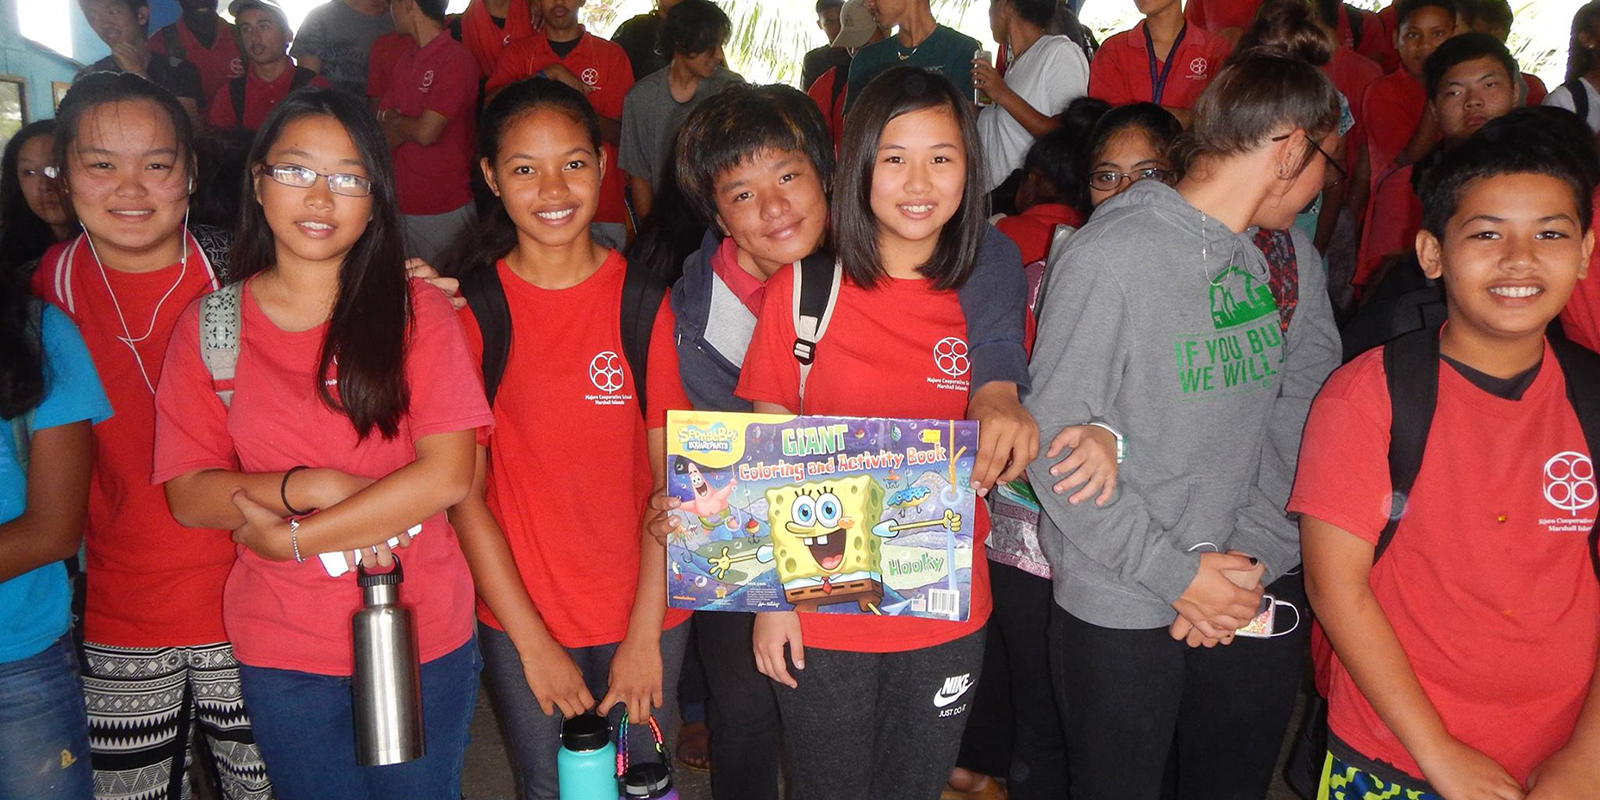 A group of schoolchildren wearing backpacks hold a picture of Spongebob Squarepants